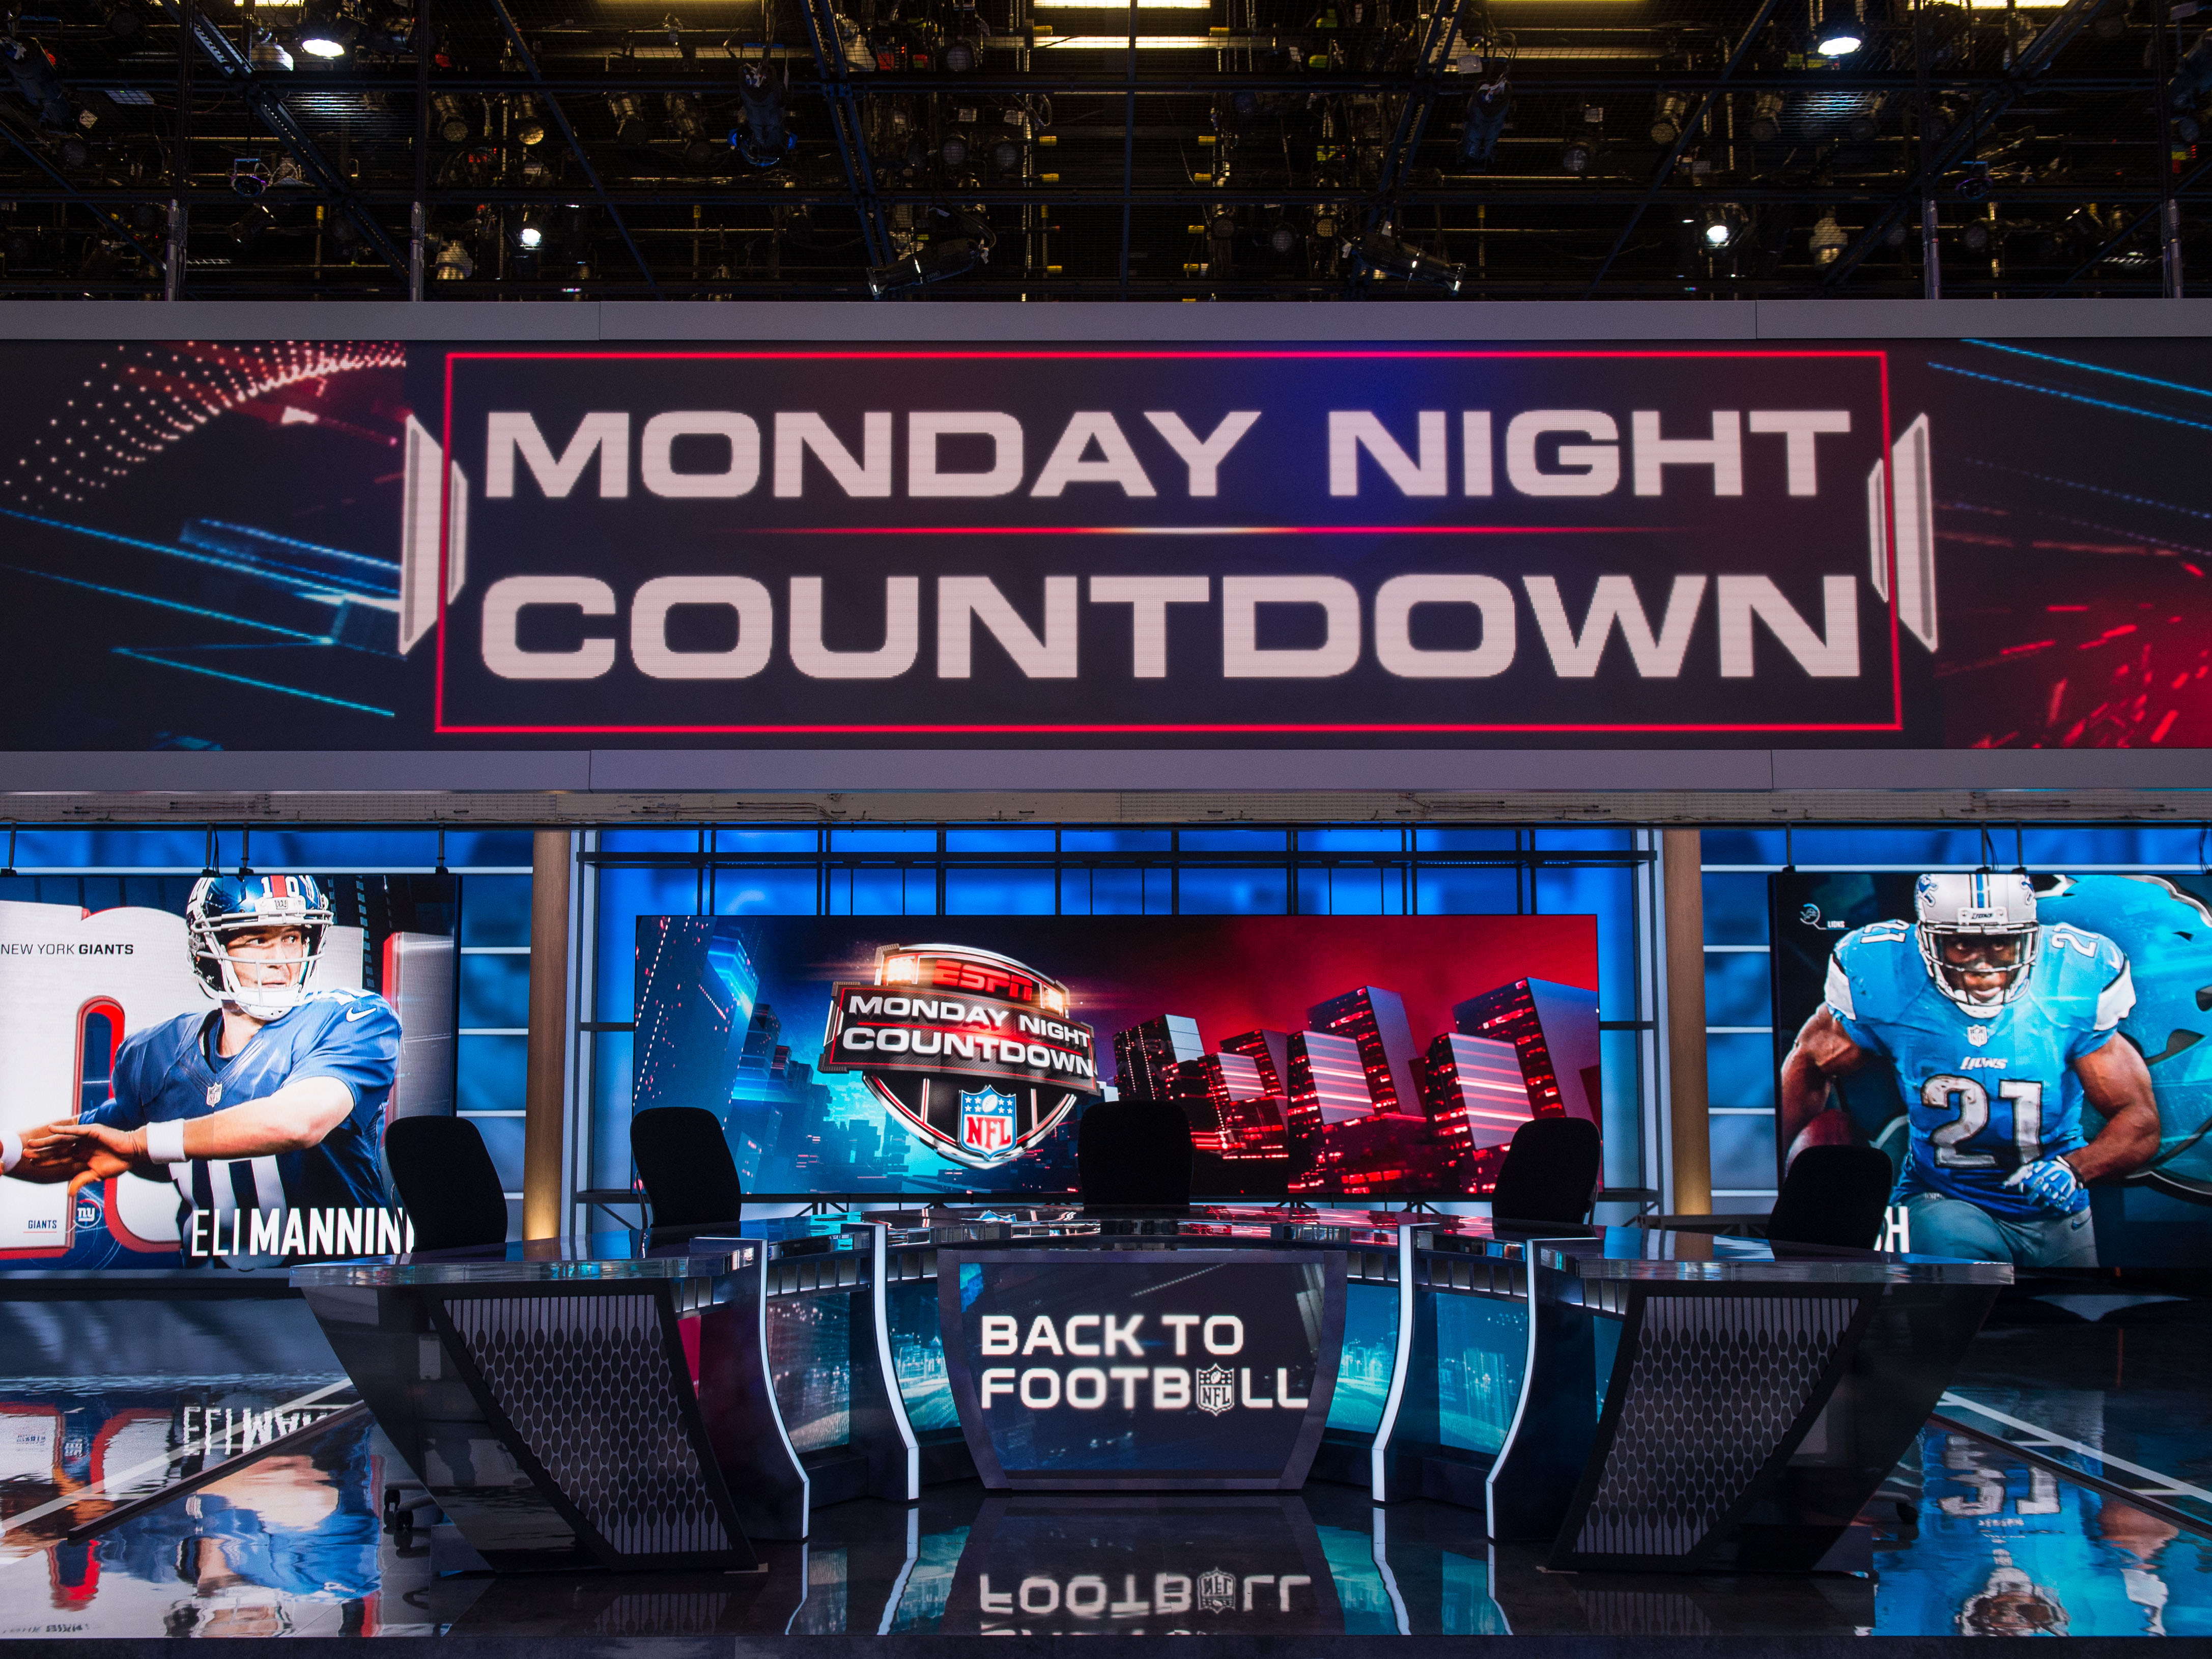 First look at Sky Sports' new Monday Night Football studio with